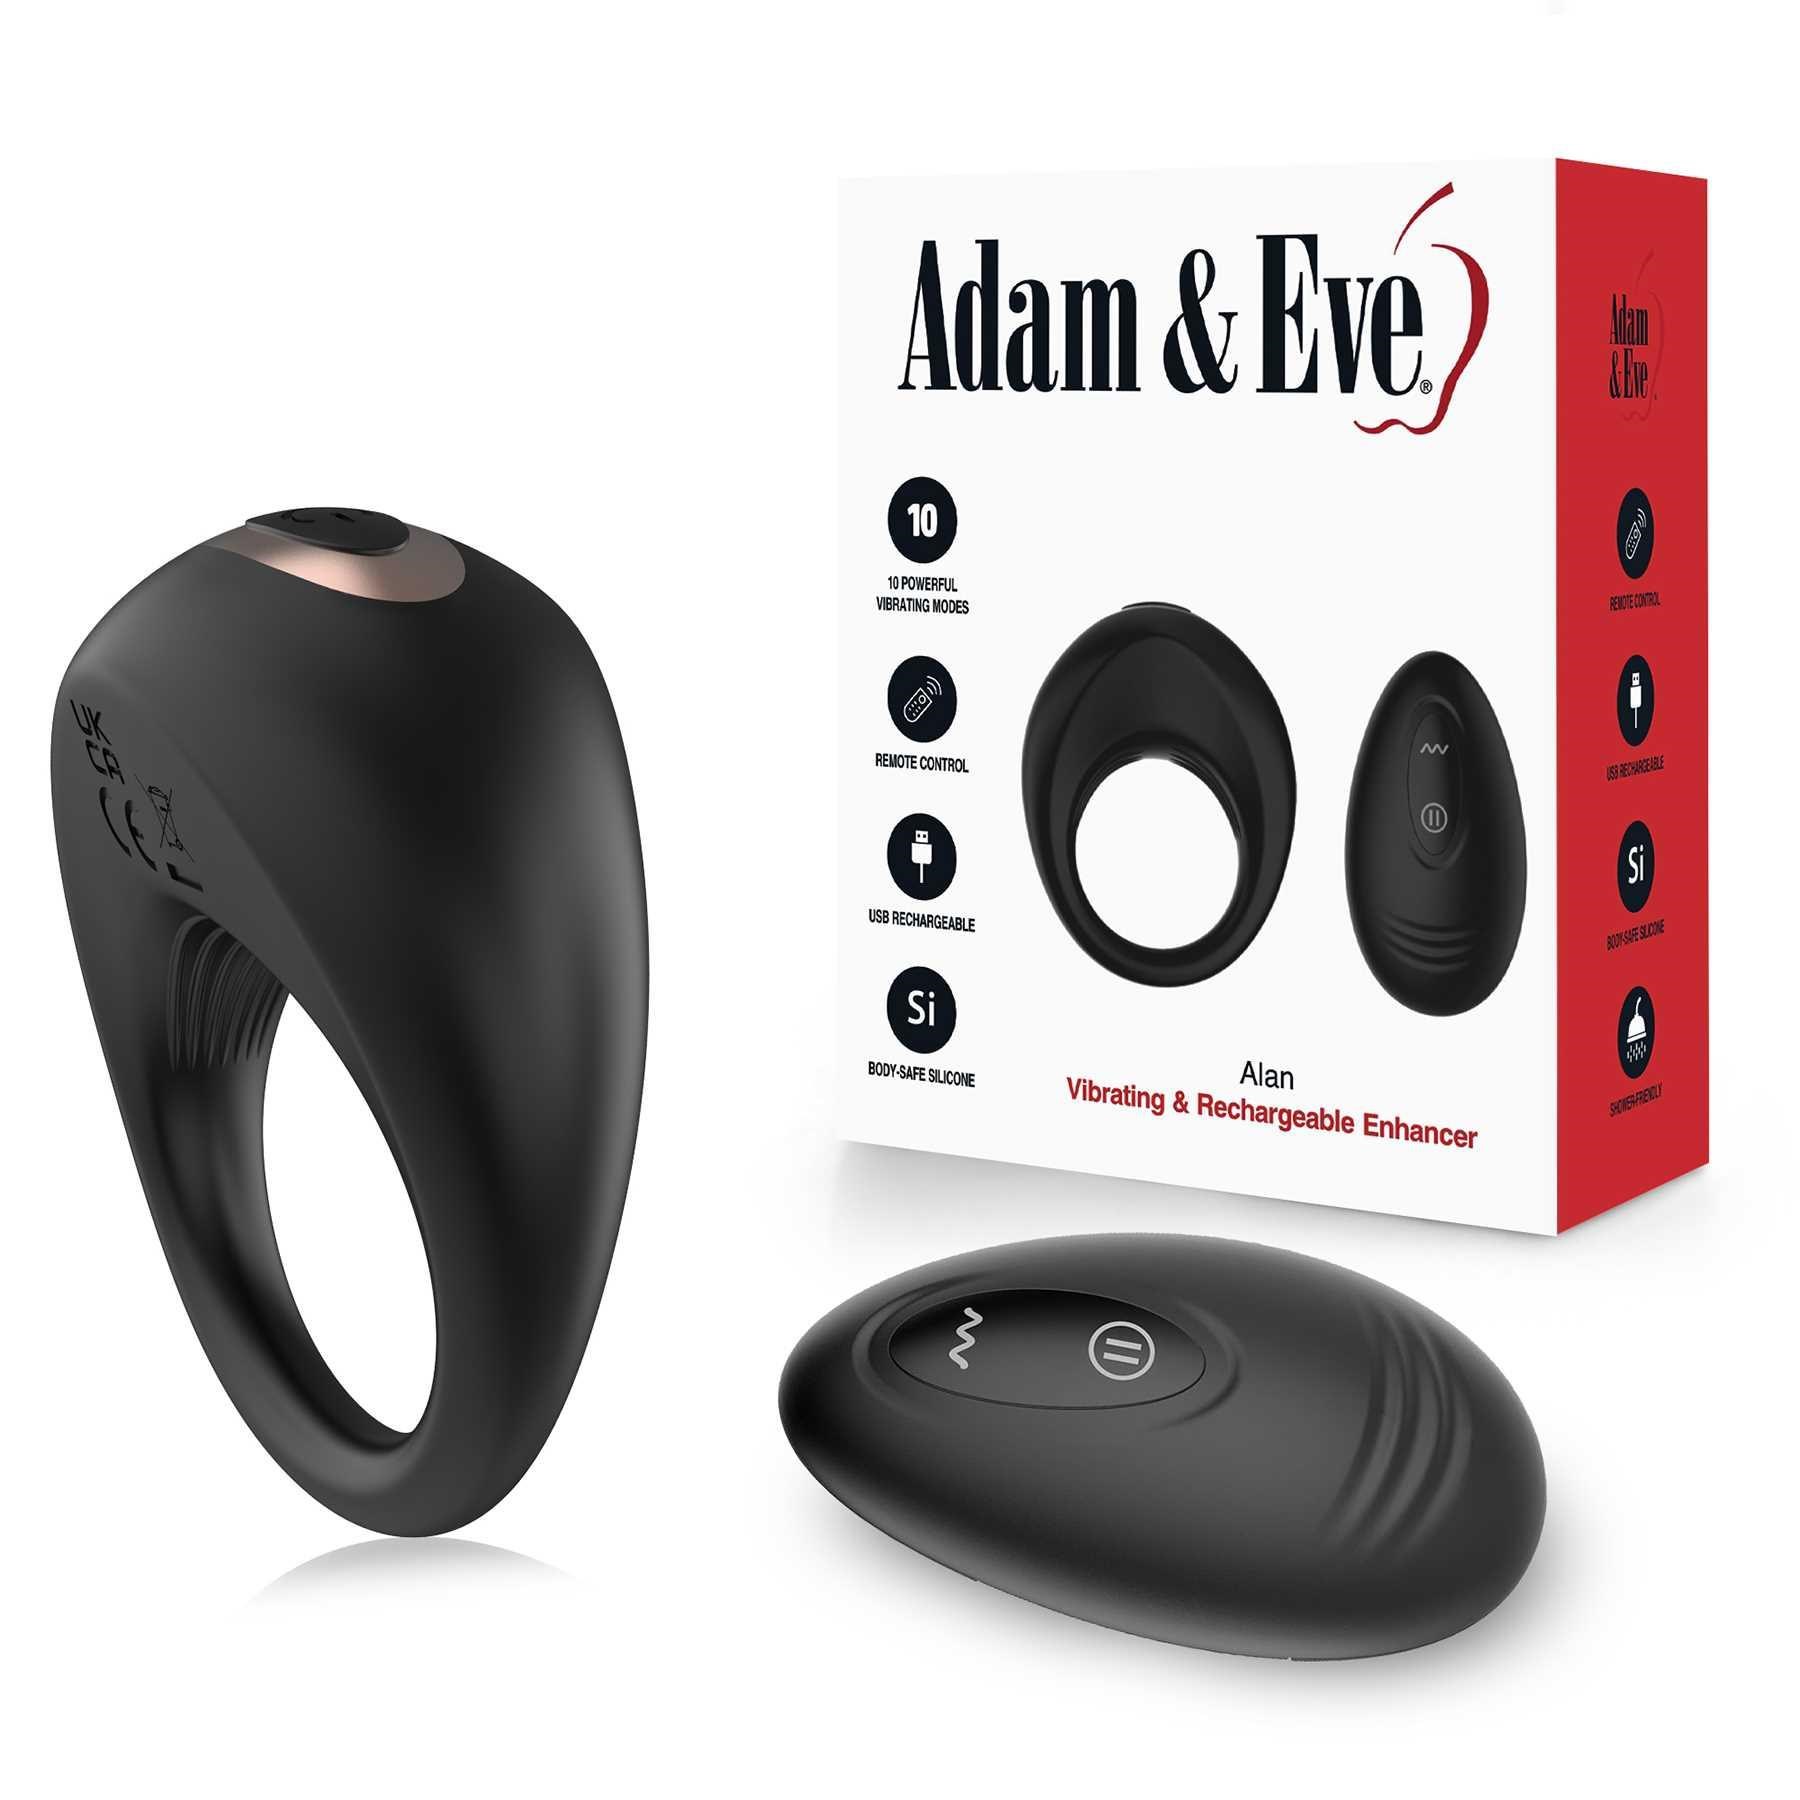 Alan Vibrating & Rechargeable Enhancer with box